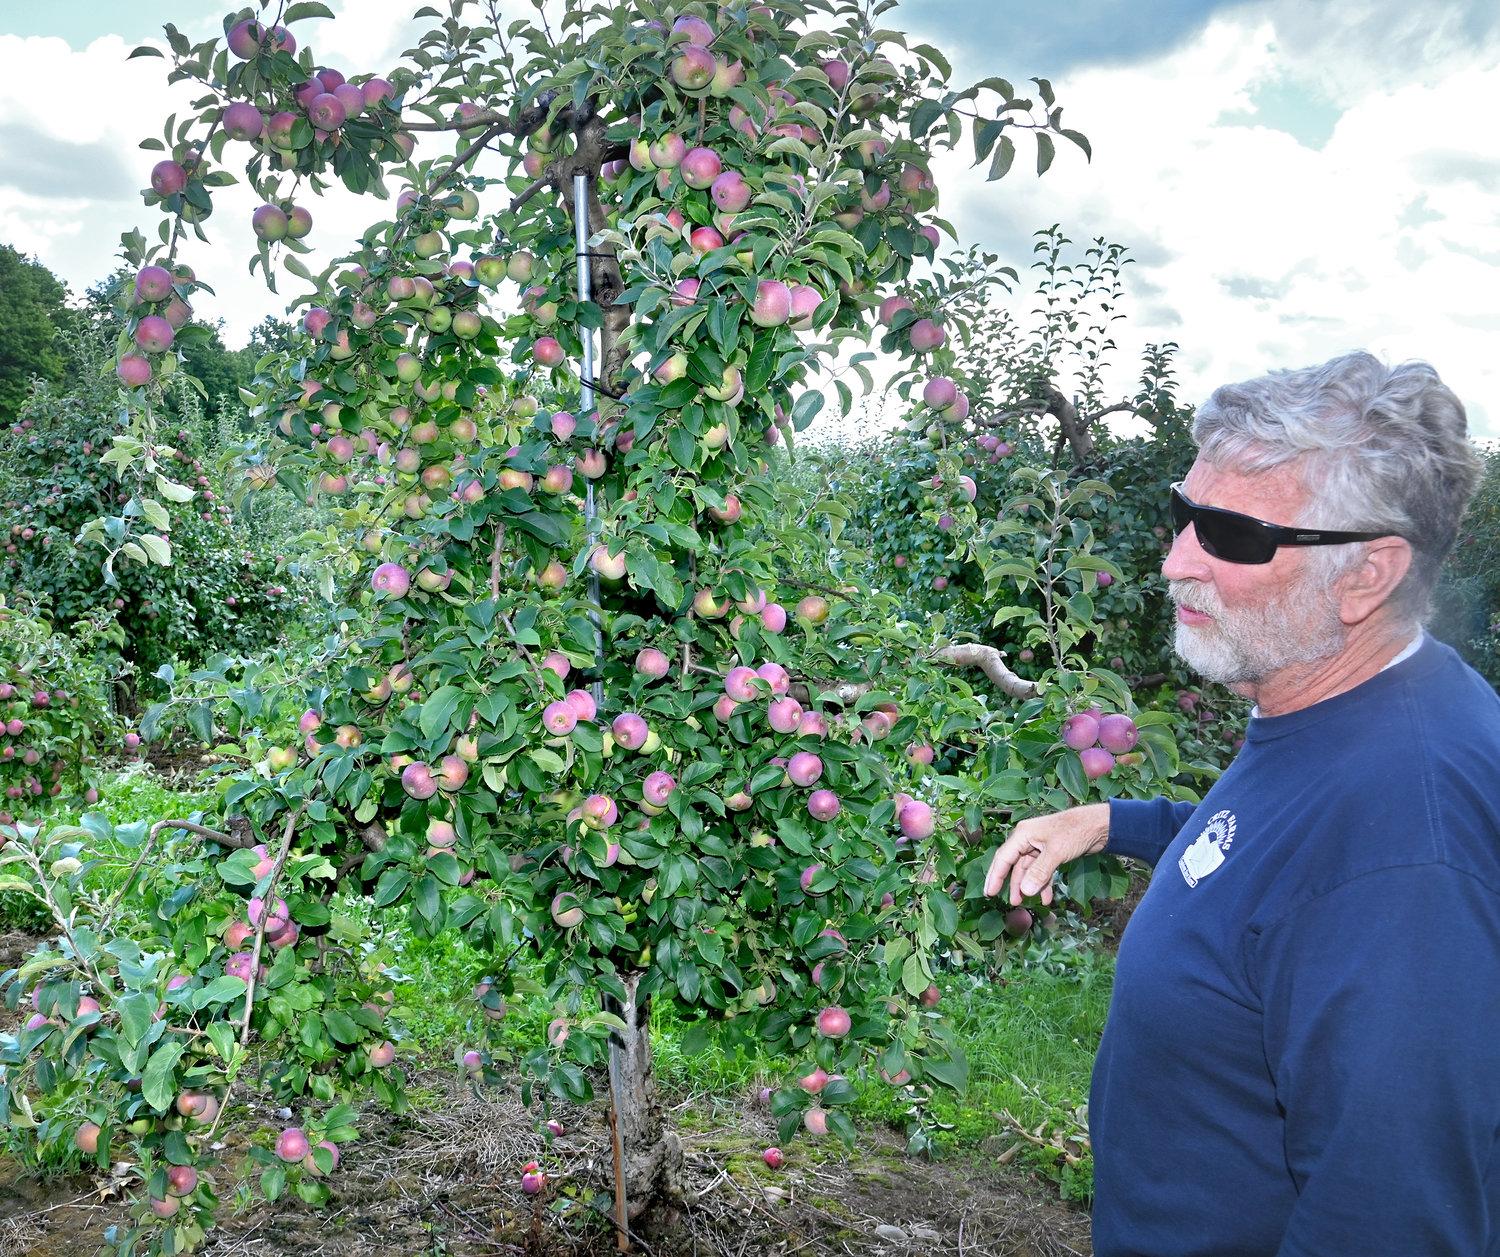 Matthew Critz with a tree full of Empire apples in his orchard in Cazenovia on Wednesday, Aug. 31.